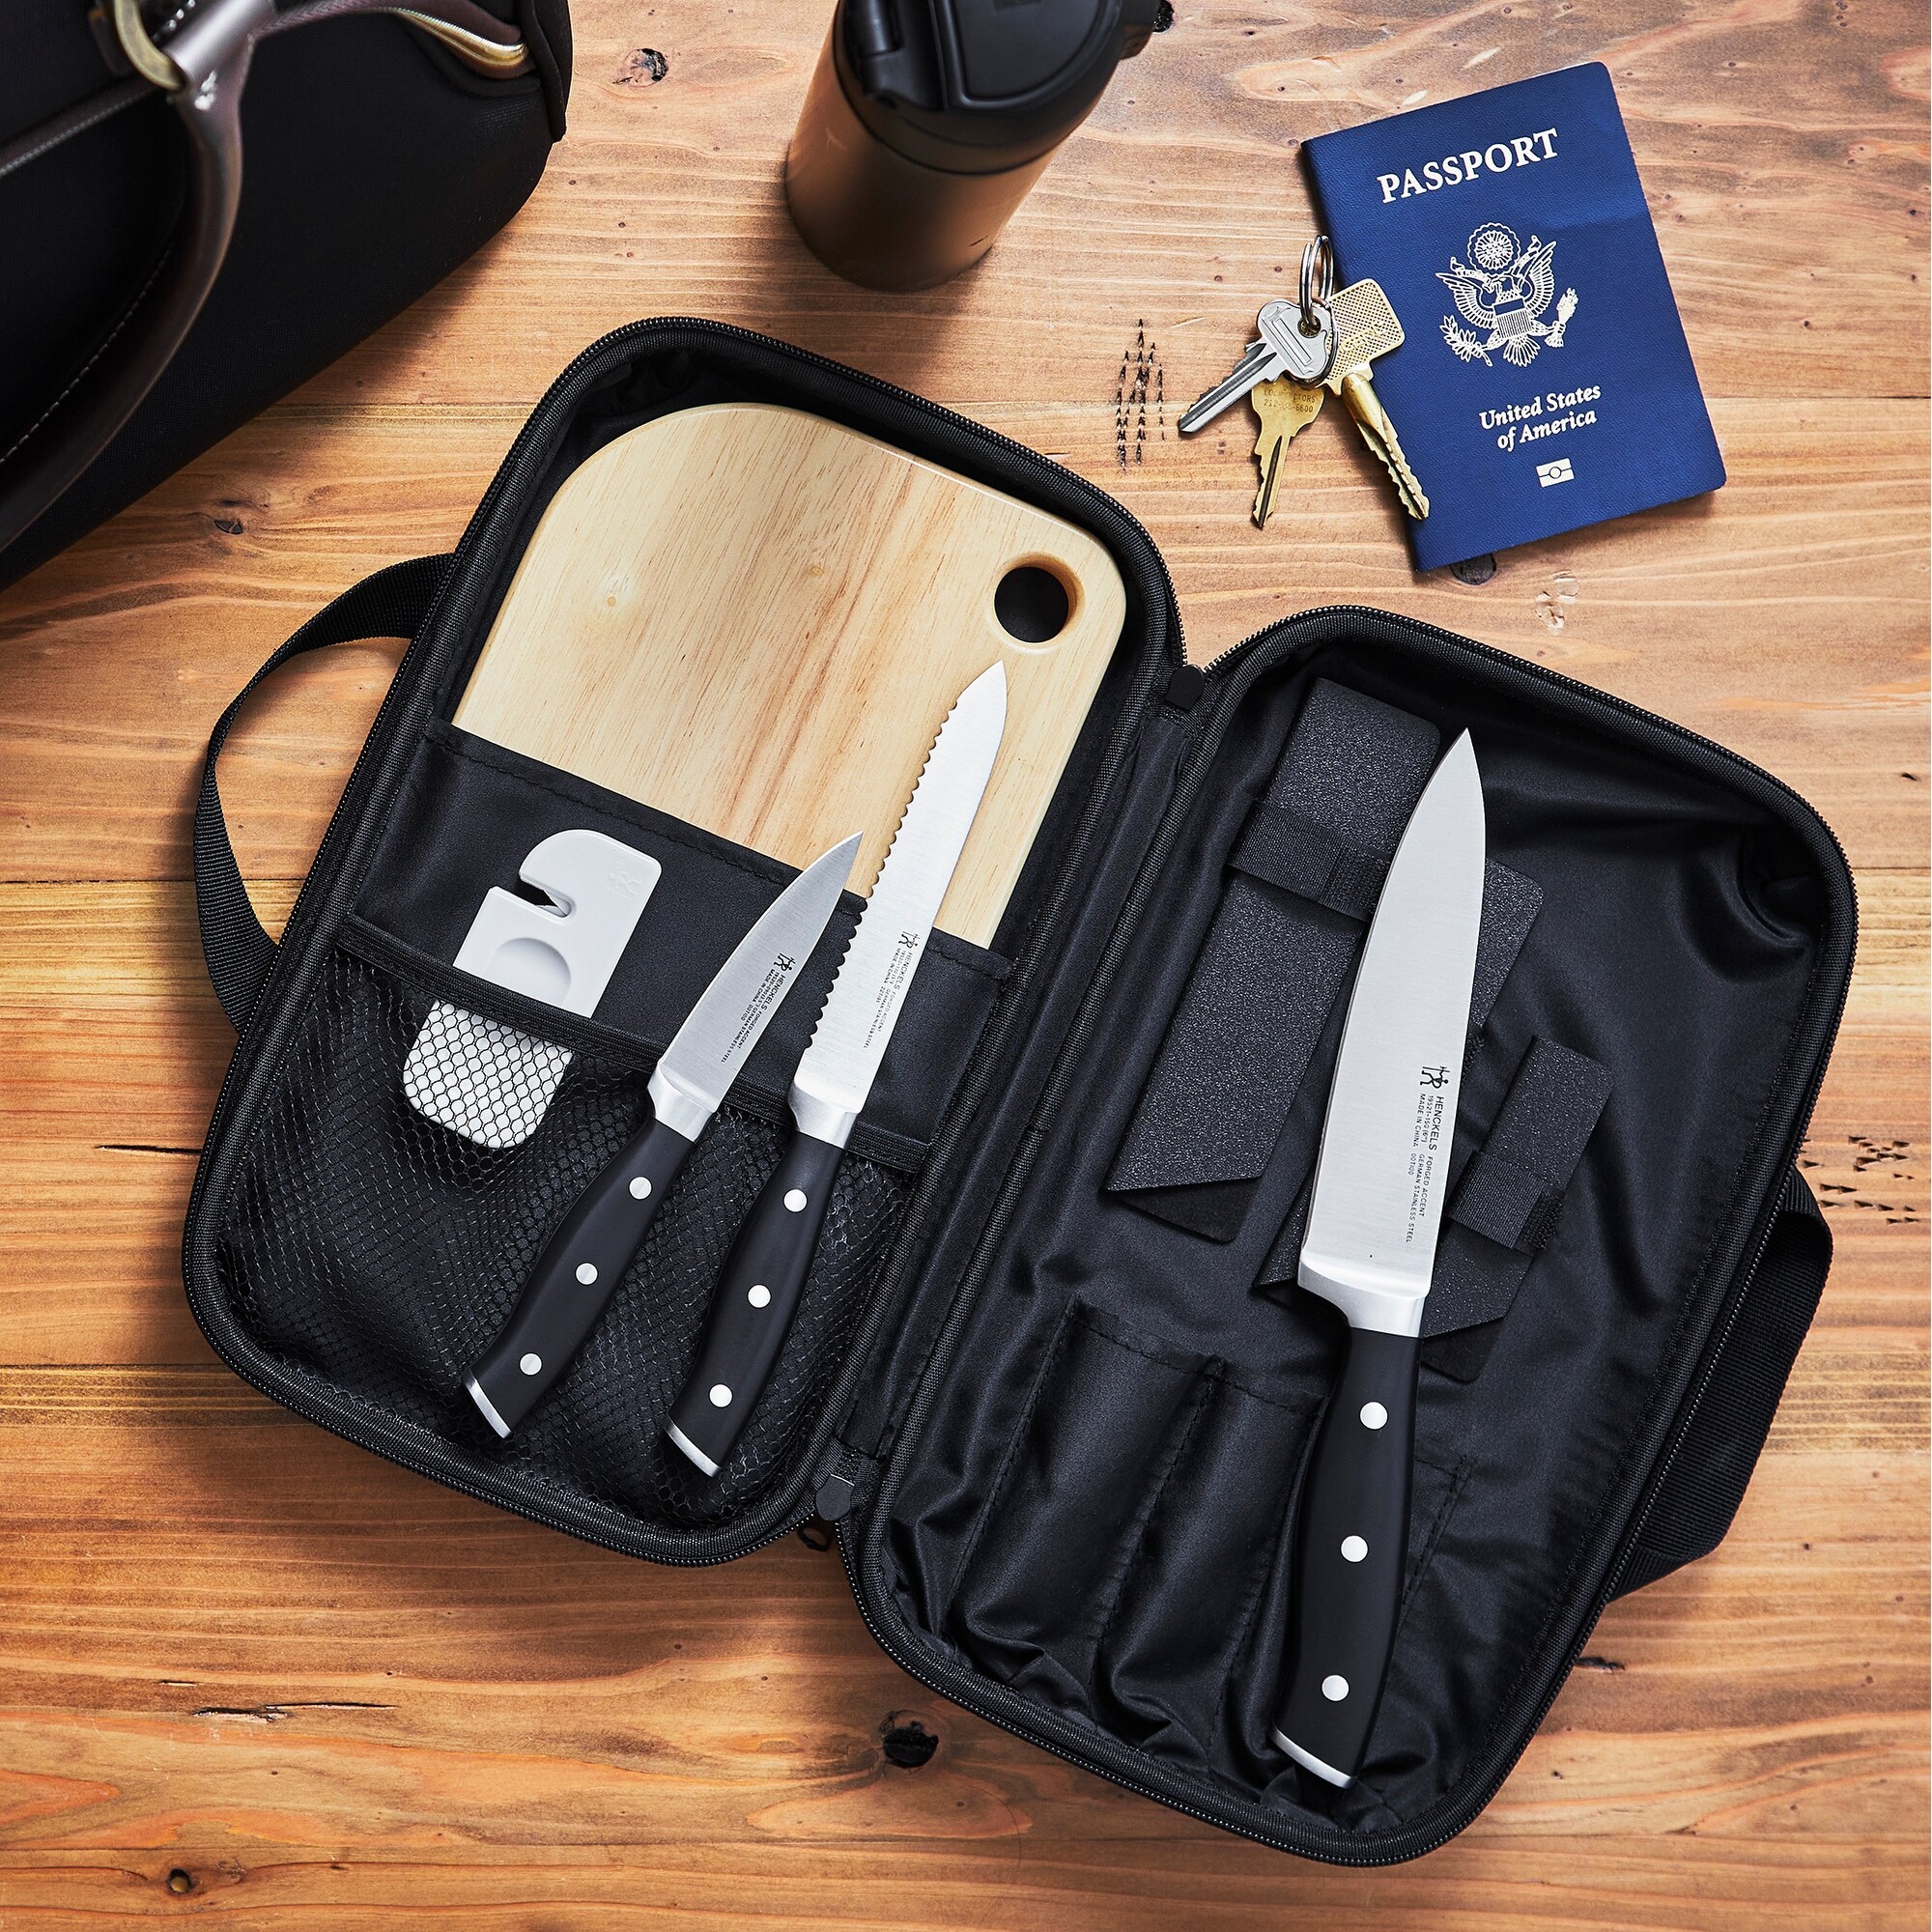 https://ak1.ostkcdn.com/images/products/is/images/direct/447d84bcebe3efbf1966c358a50ff4b1a32375fb/Henckels-Forged-Accent-6-pc-Travel-Knife-Set.jpg